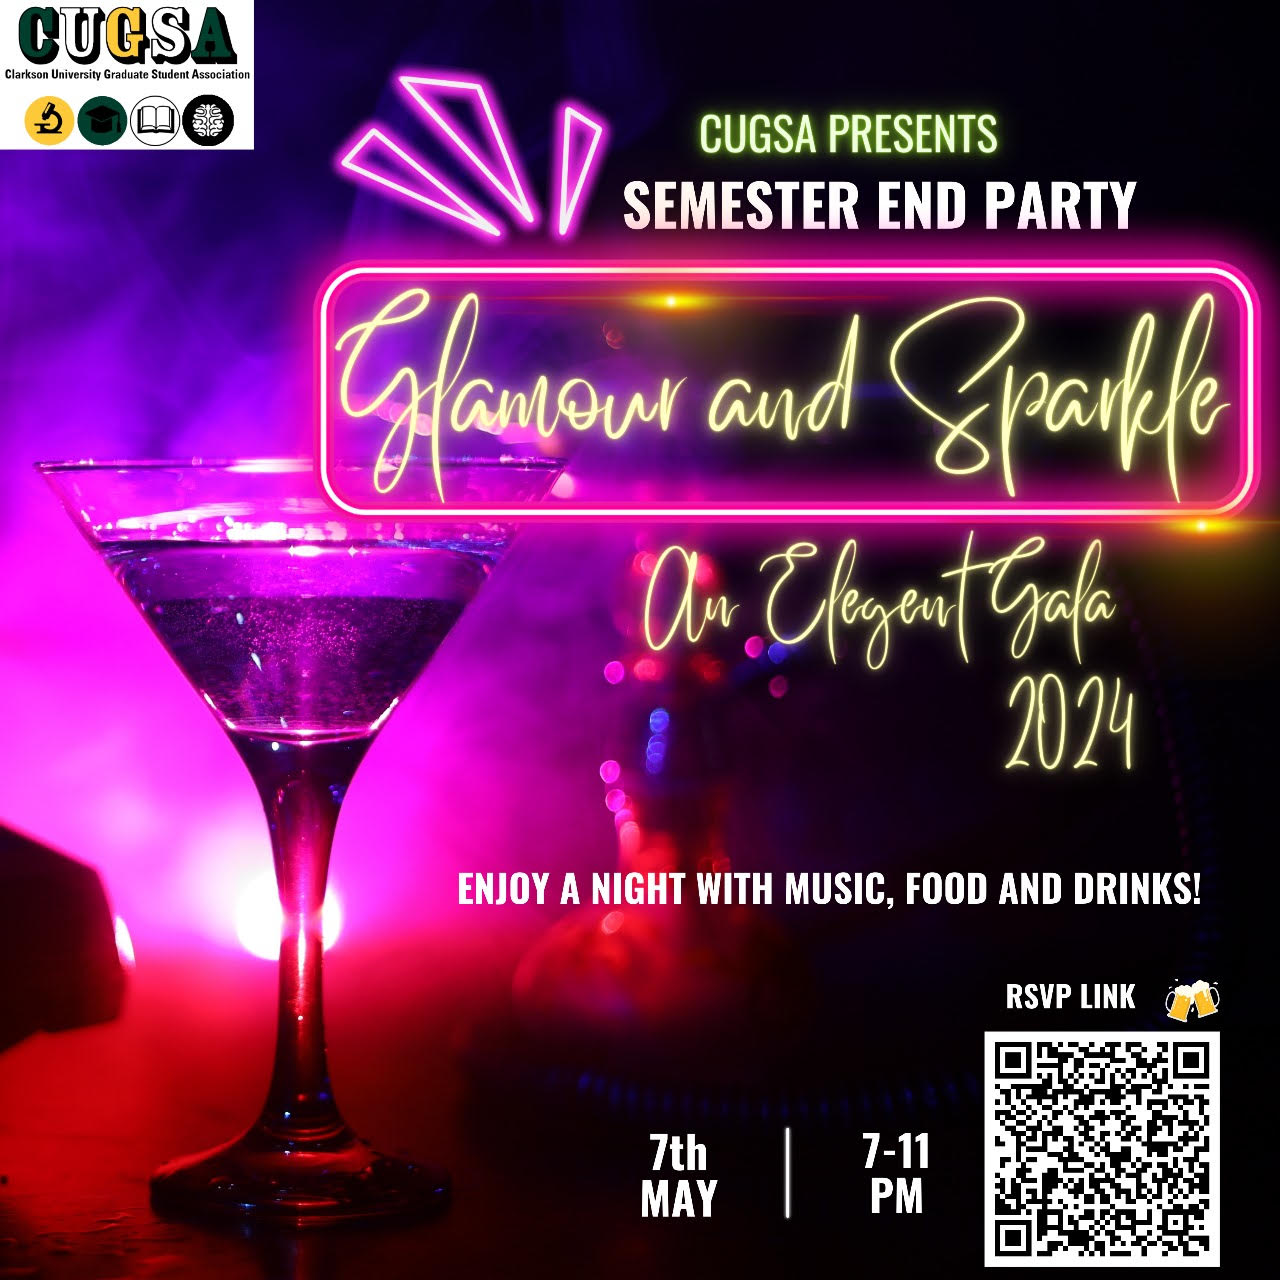 A martini glass sits on a table in a dark club with pink lighting, as a backdrop for a flyer reading: CUGSA PRESENTS SEMESTER END PARTY Glamour and Sparkle An elegant gala 2024 ENJOY A NIGHT WITH MUSIC, FOOD, AND DRINKS! RSVP LINK 7 th MAY 7-11PM